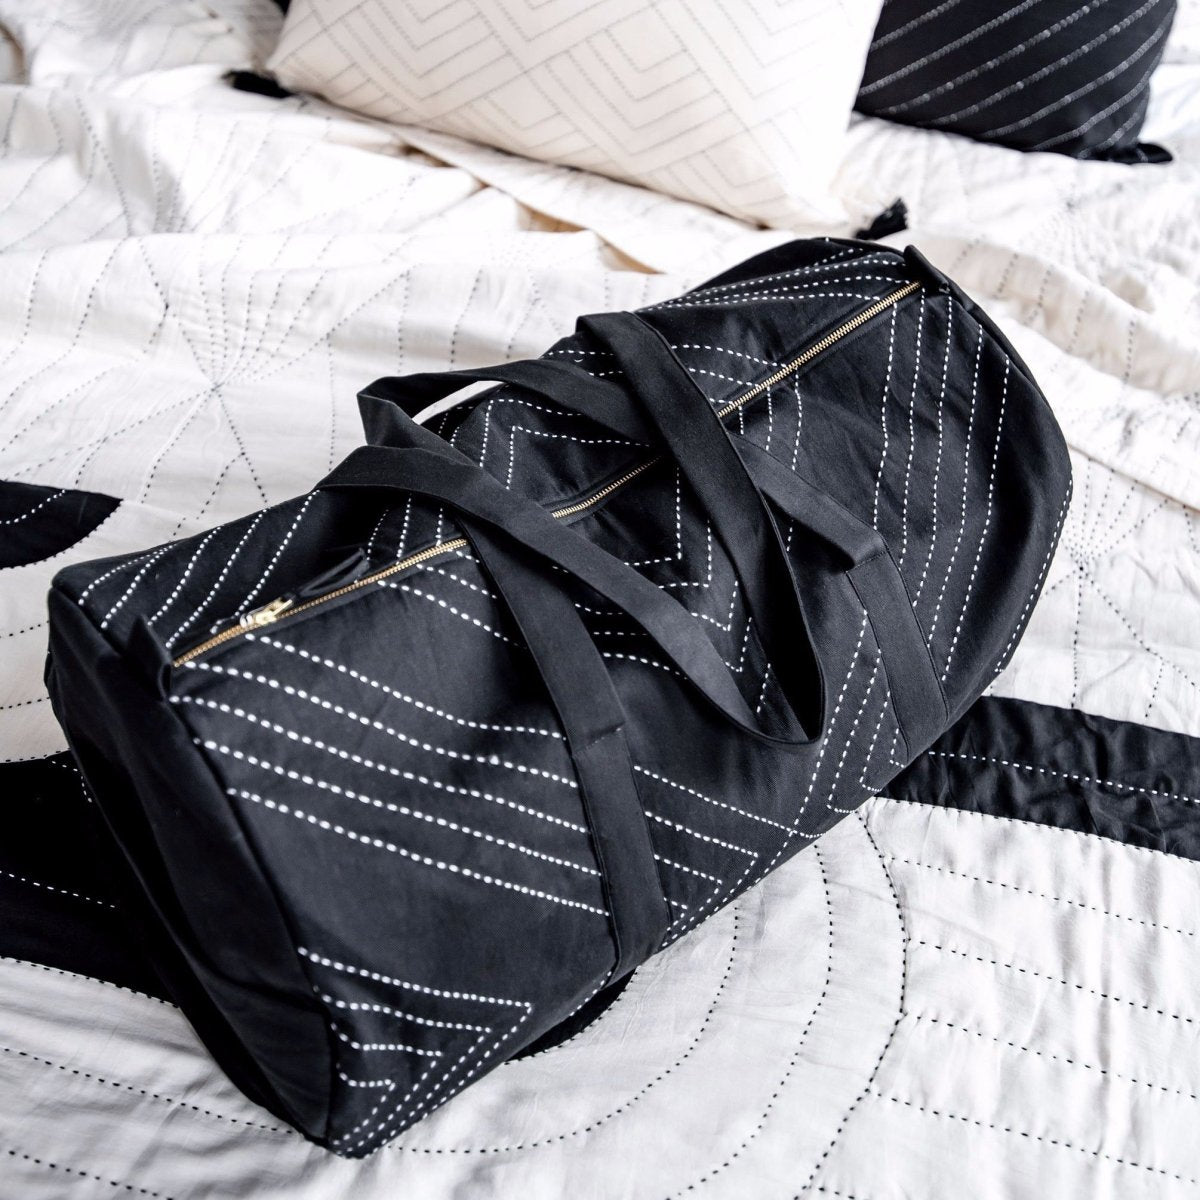 Black duffel bag with white stitched geometric design. Designed by Anchal in Louisville, Kentucky and made in Ajmer, India.